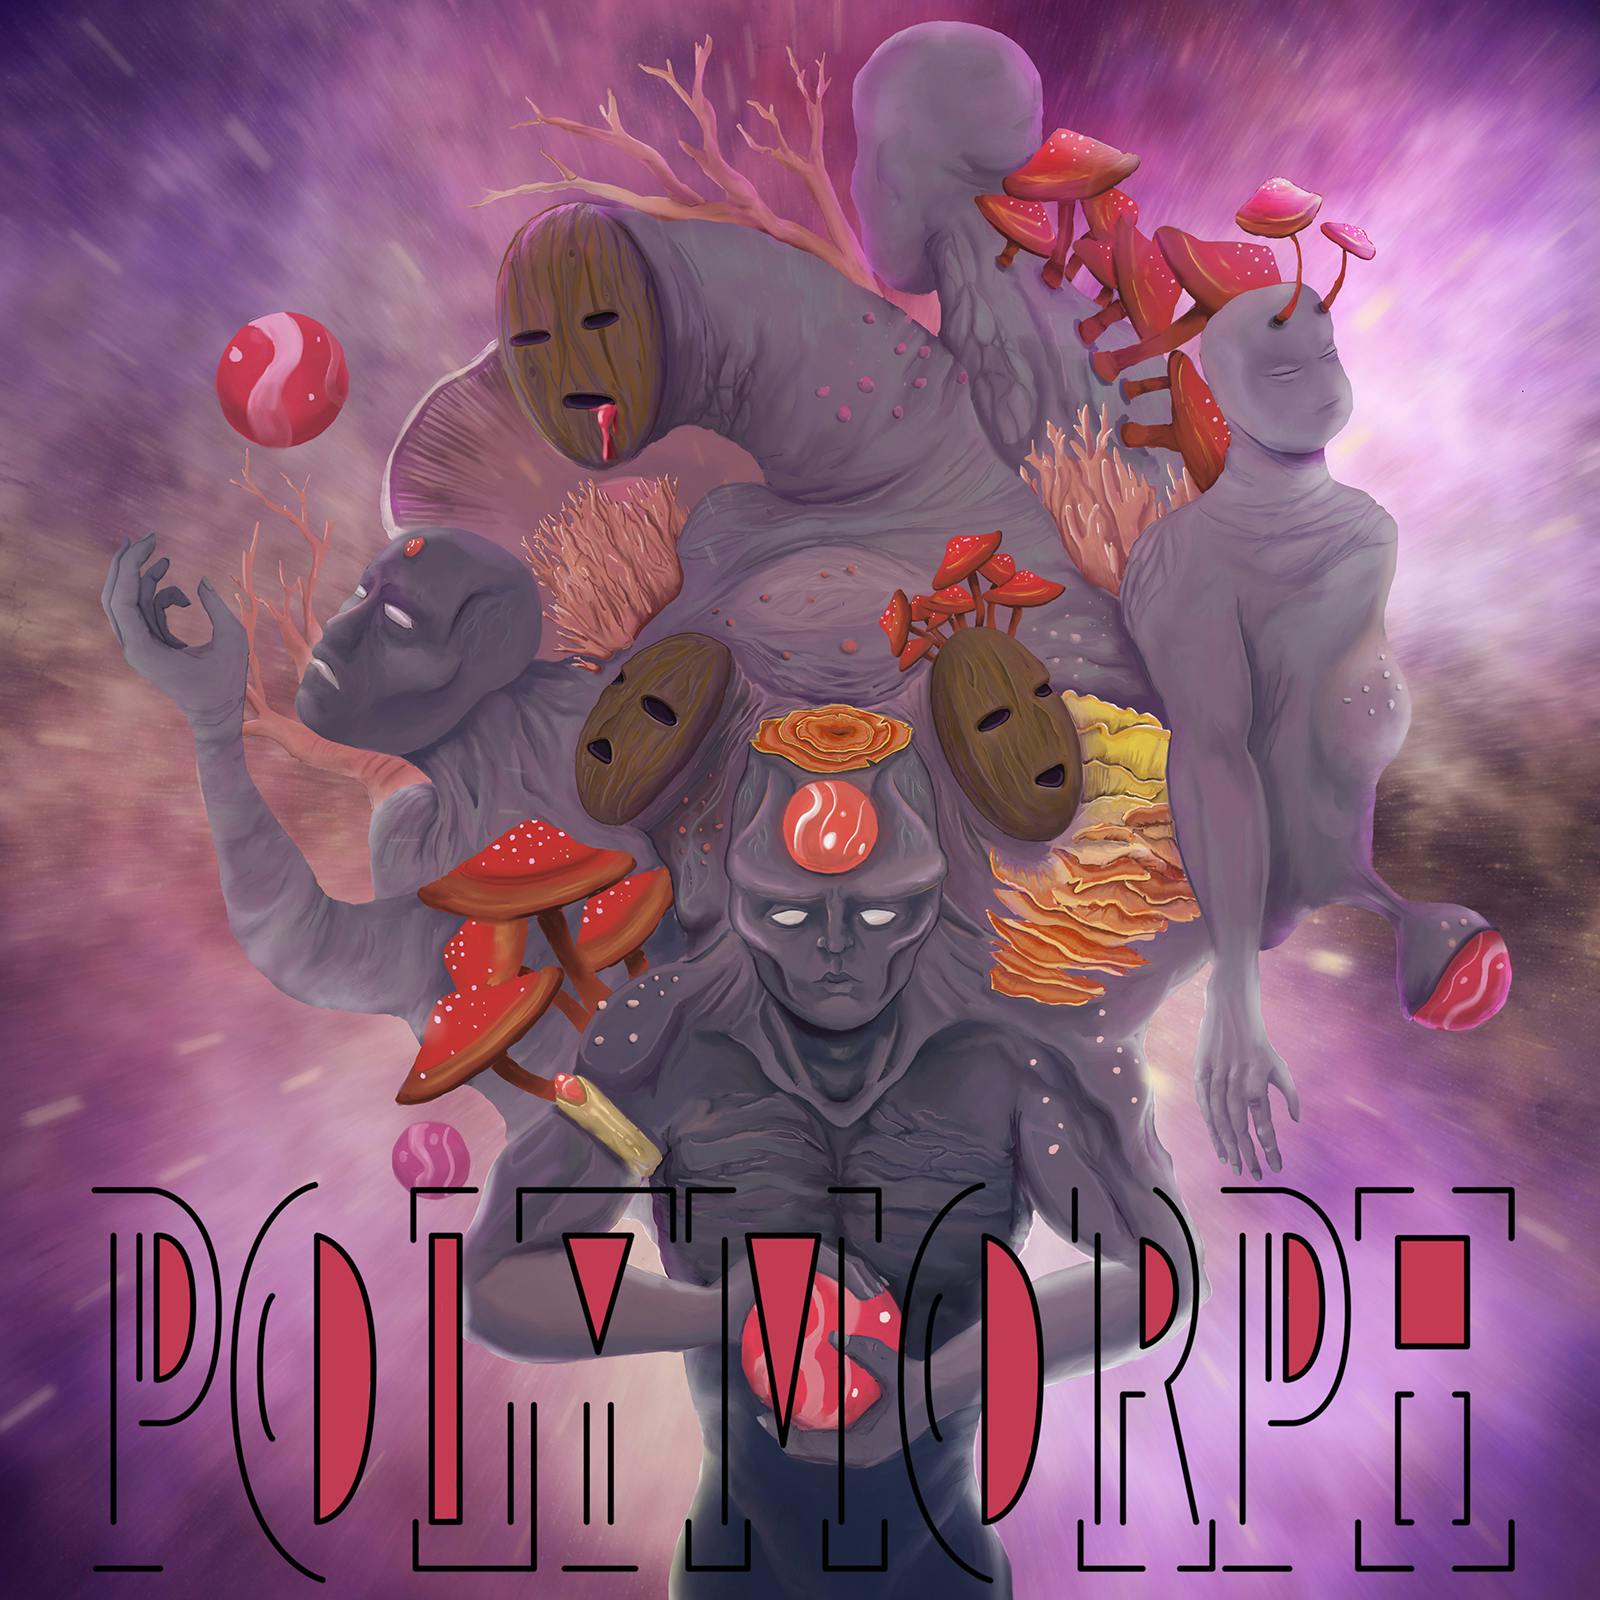 The album art for Polymorph. A cosmic purple and pink background with a mysterious and creepy figure in the foreground. The figure is an alien-like creature made up of several connected bodies and interwoven with fungi. The create is producing pink orbs and holding them in their hand.